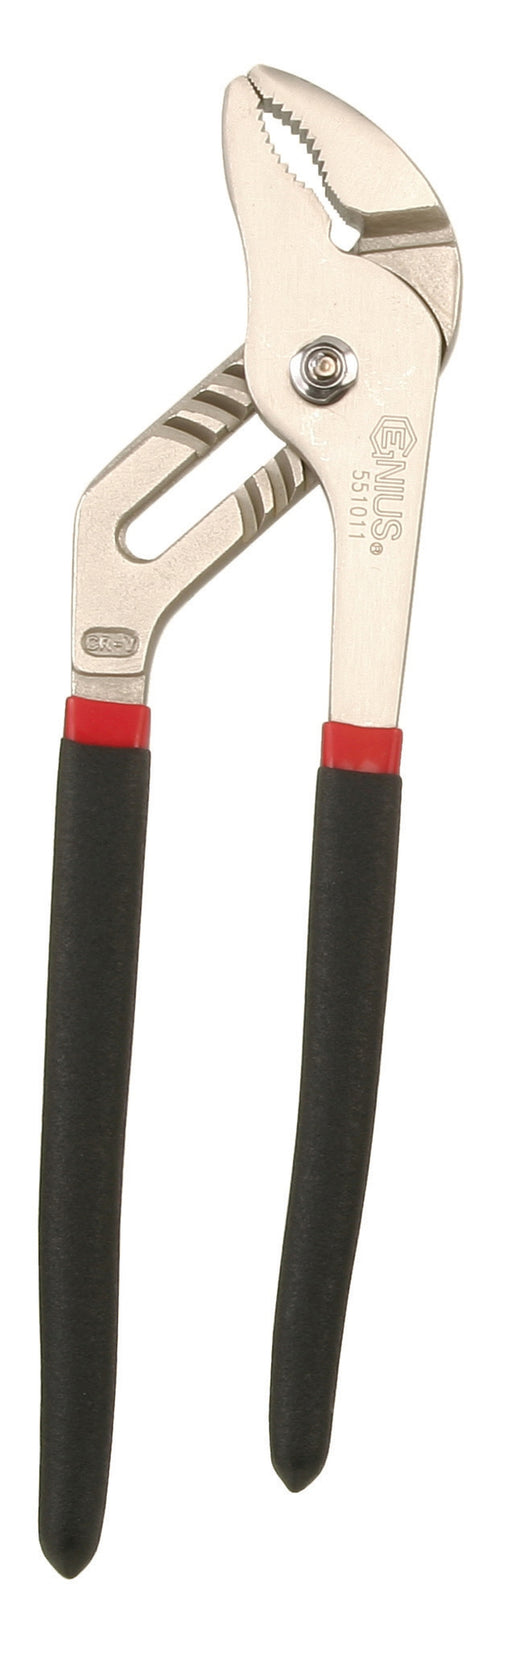 Genius Tools Tongue and Groove Pliers, 250mmL